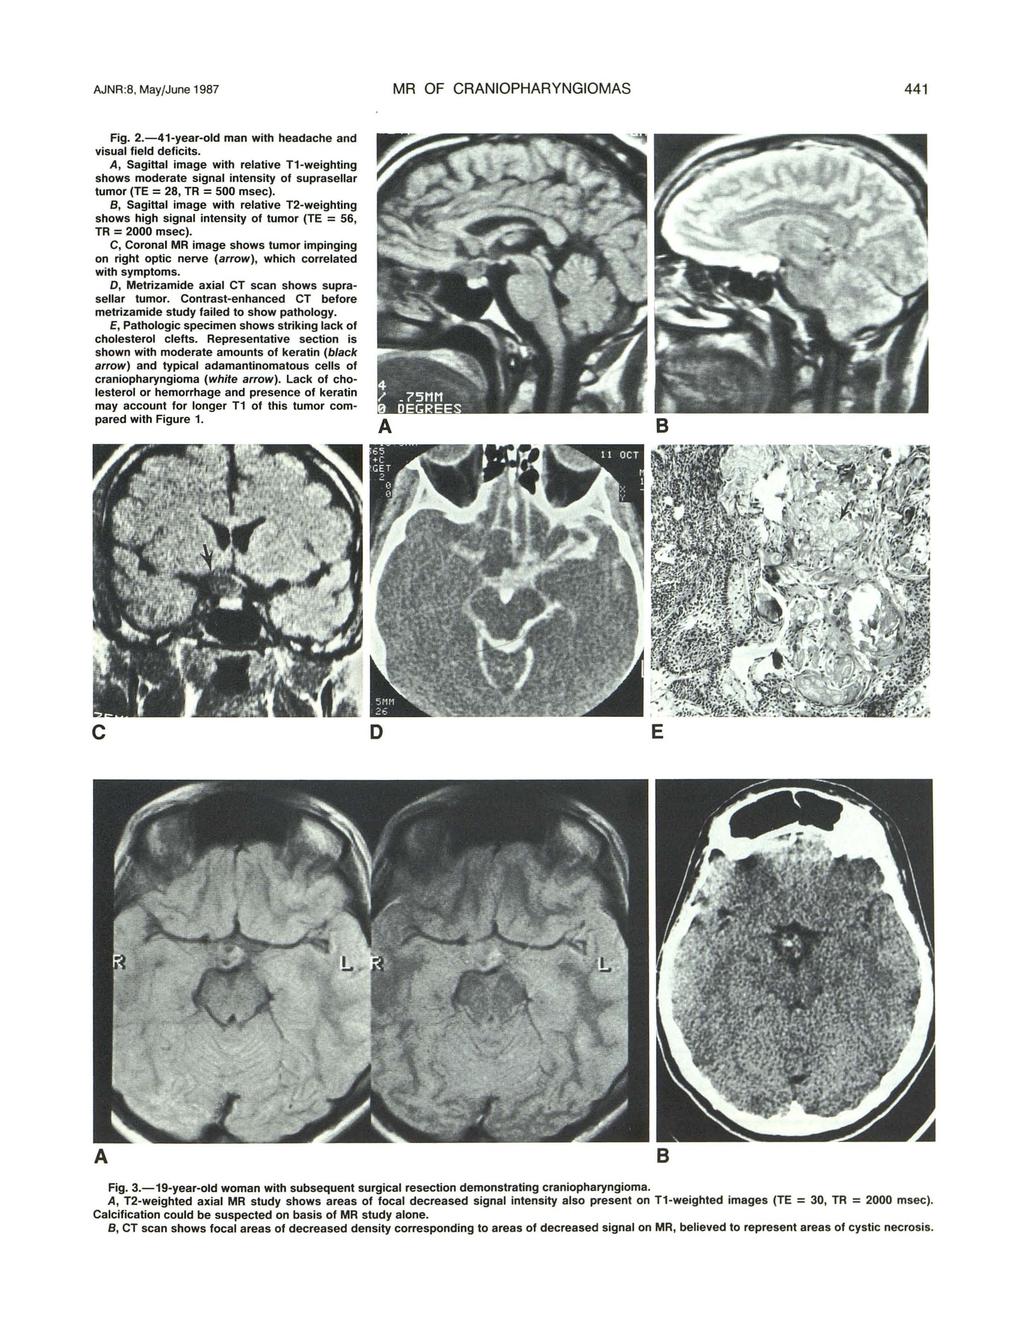 JNR:8, May/June 1987 MR OF CRNIOPHRYNGIOMS 441 Fig. 2.-41-year-old man with headahe and visual field defiits.